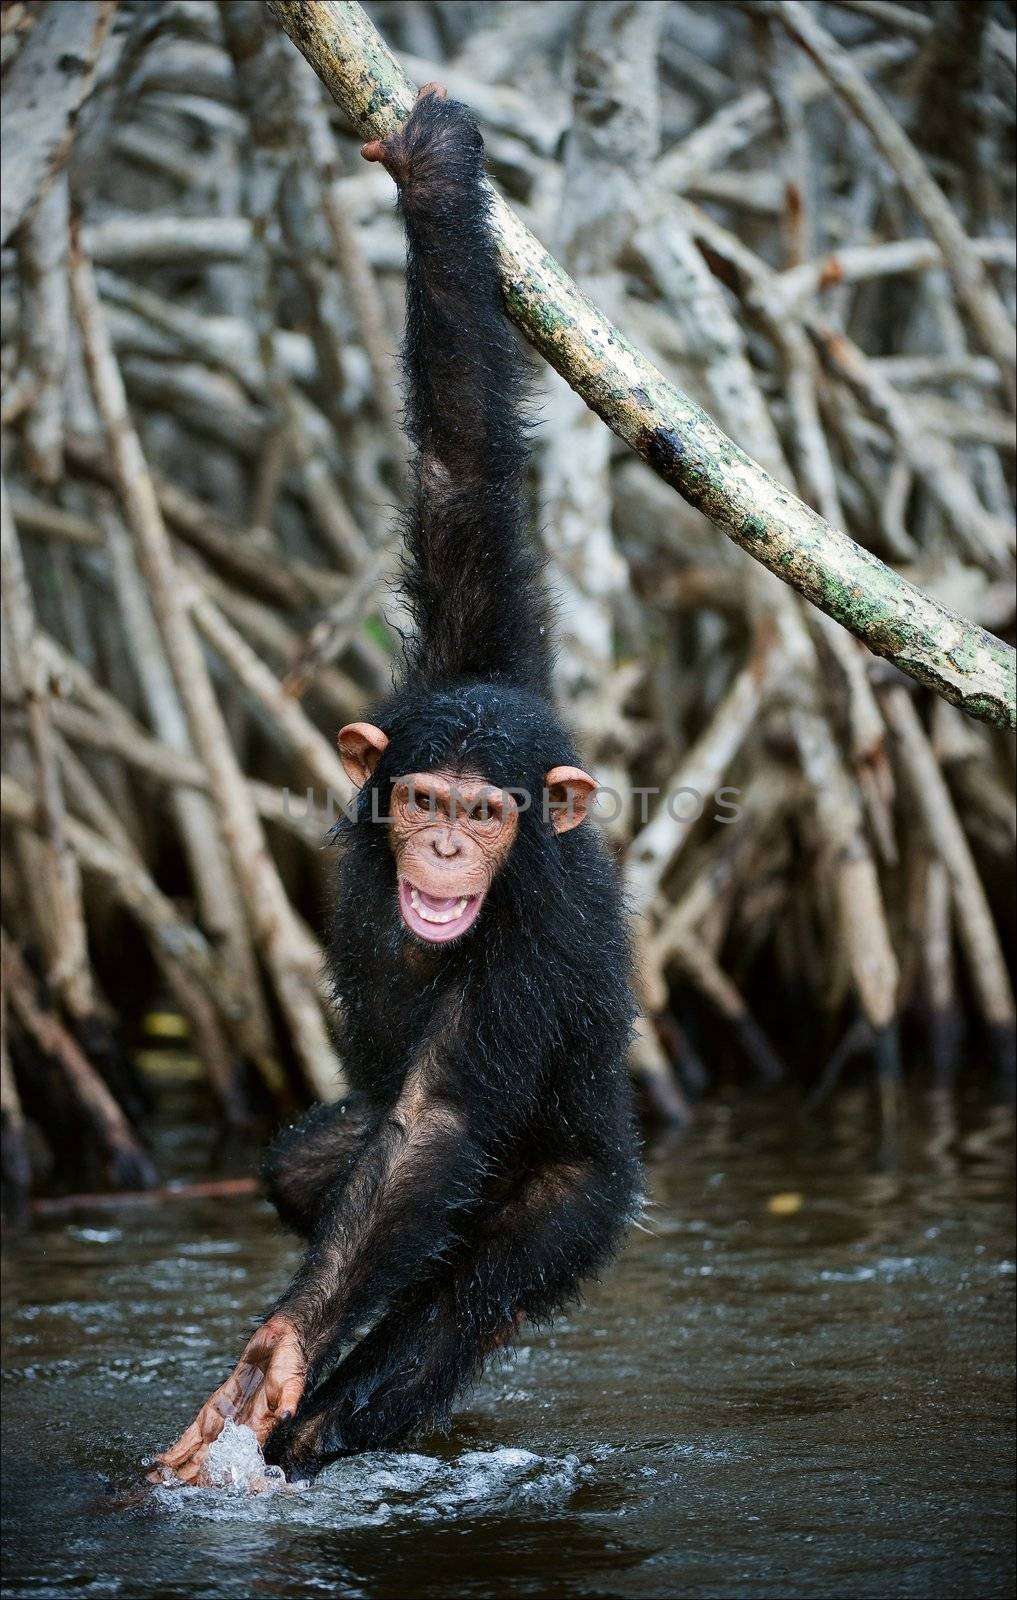  The kid of a chimpanzee hangs on a branch and plays with water, splashing on the parties.